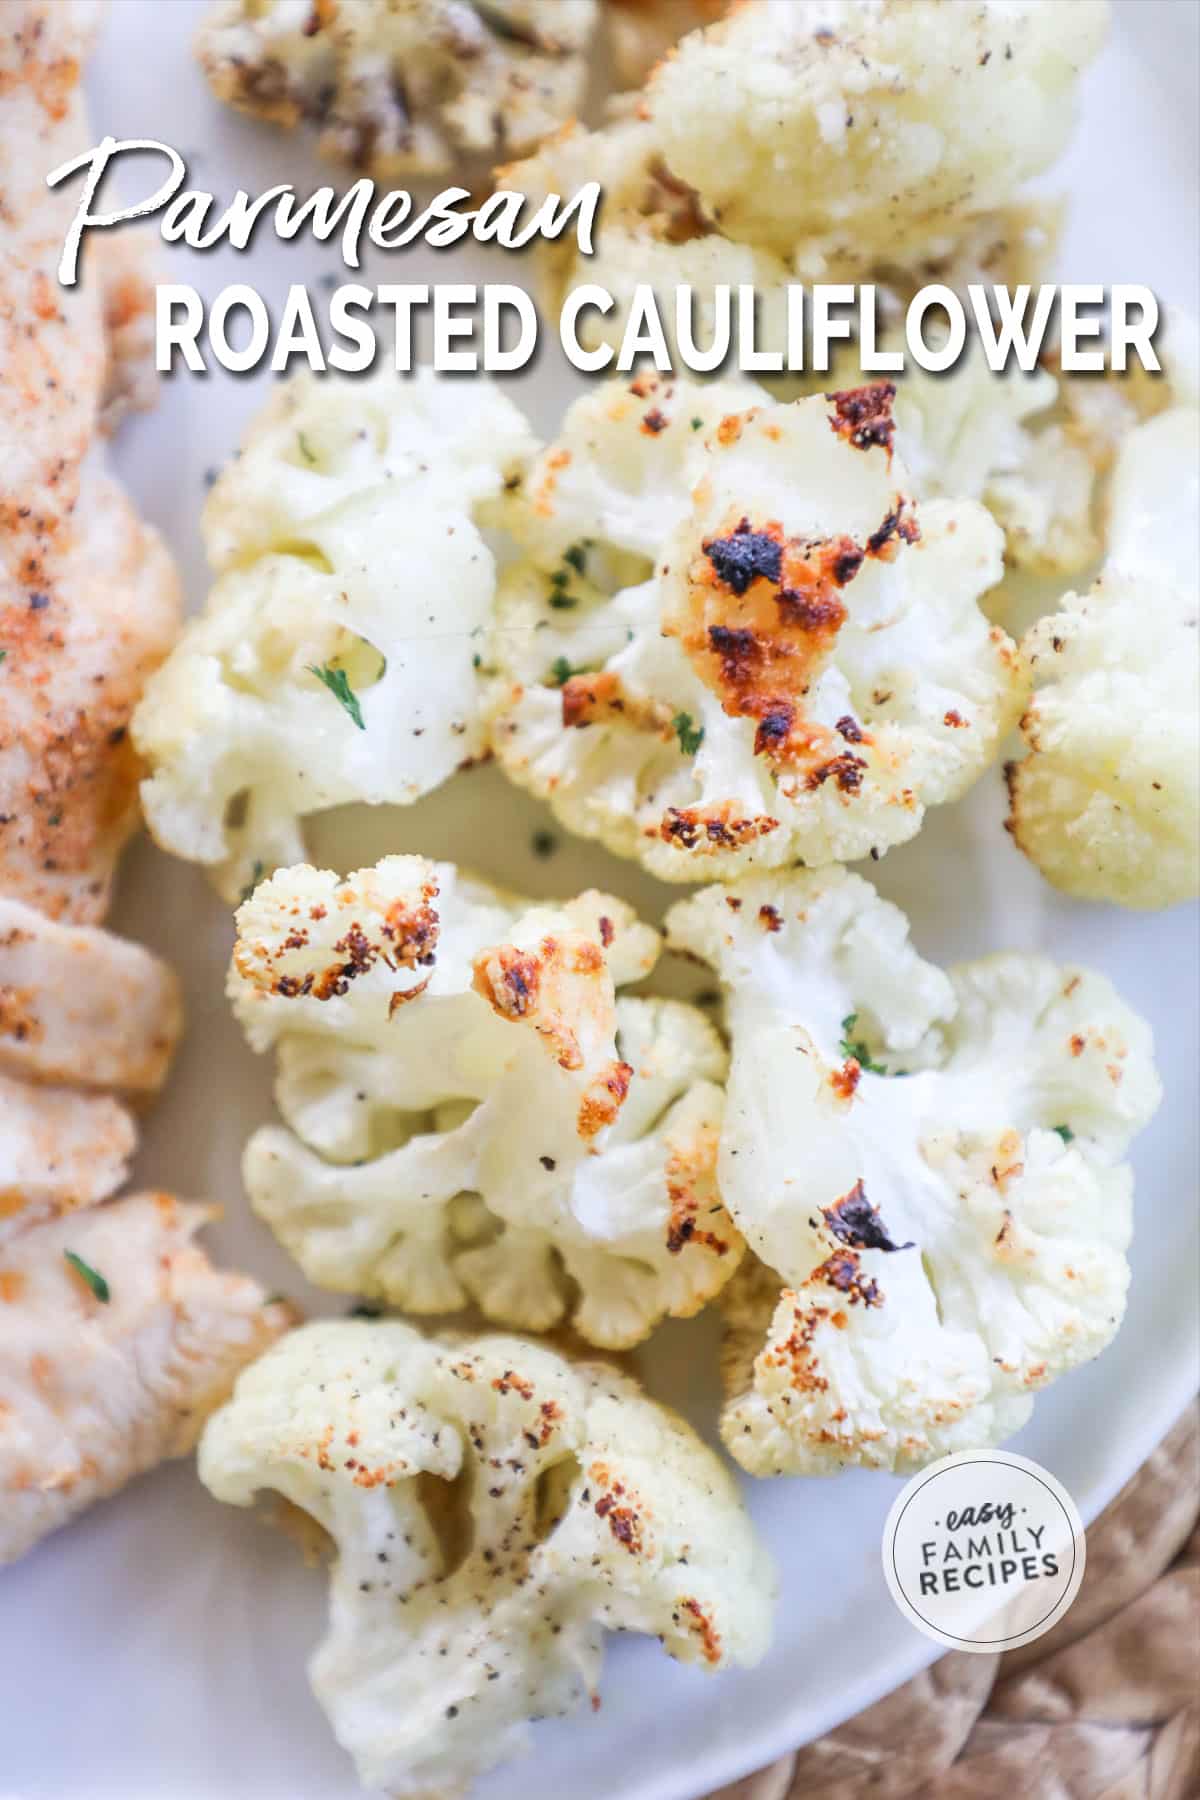 Golden brown parmesan roasted cauliflower on a plate.